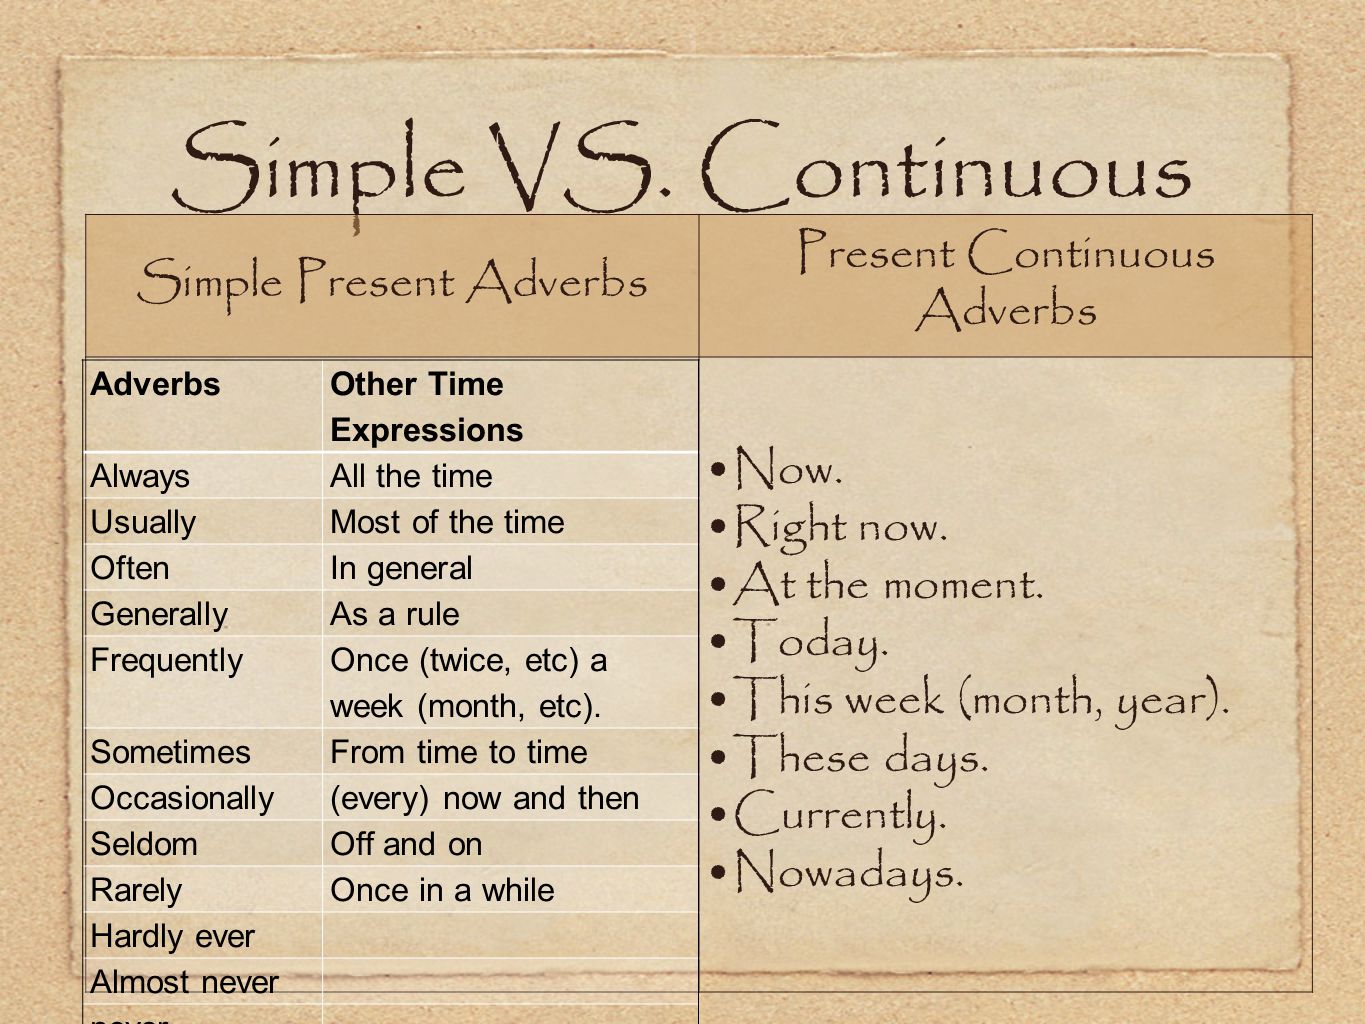 Simple VS. Continuous Simple Present Adverbs Present Continuous Adverbs Now.